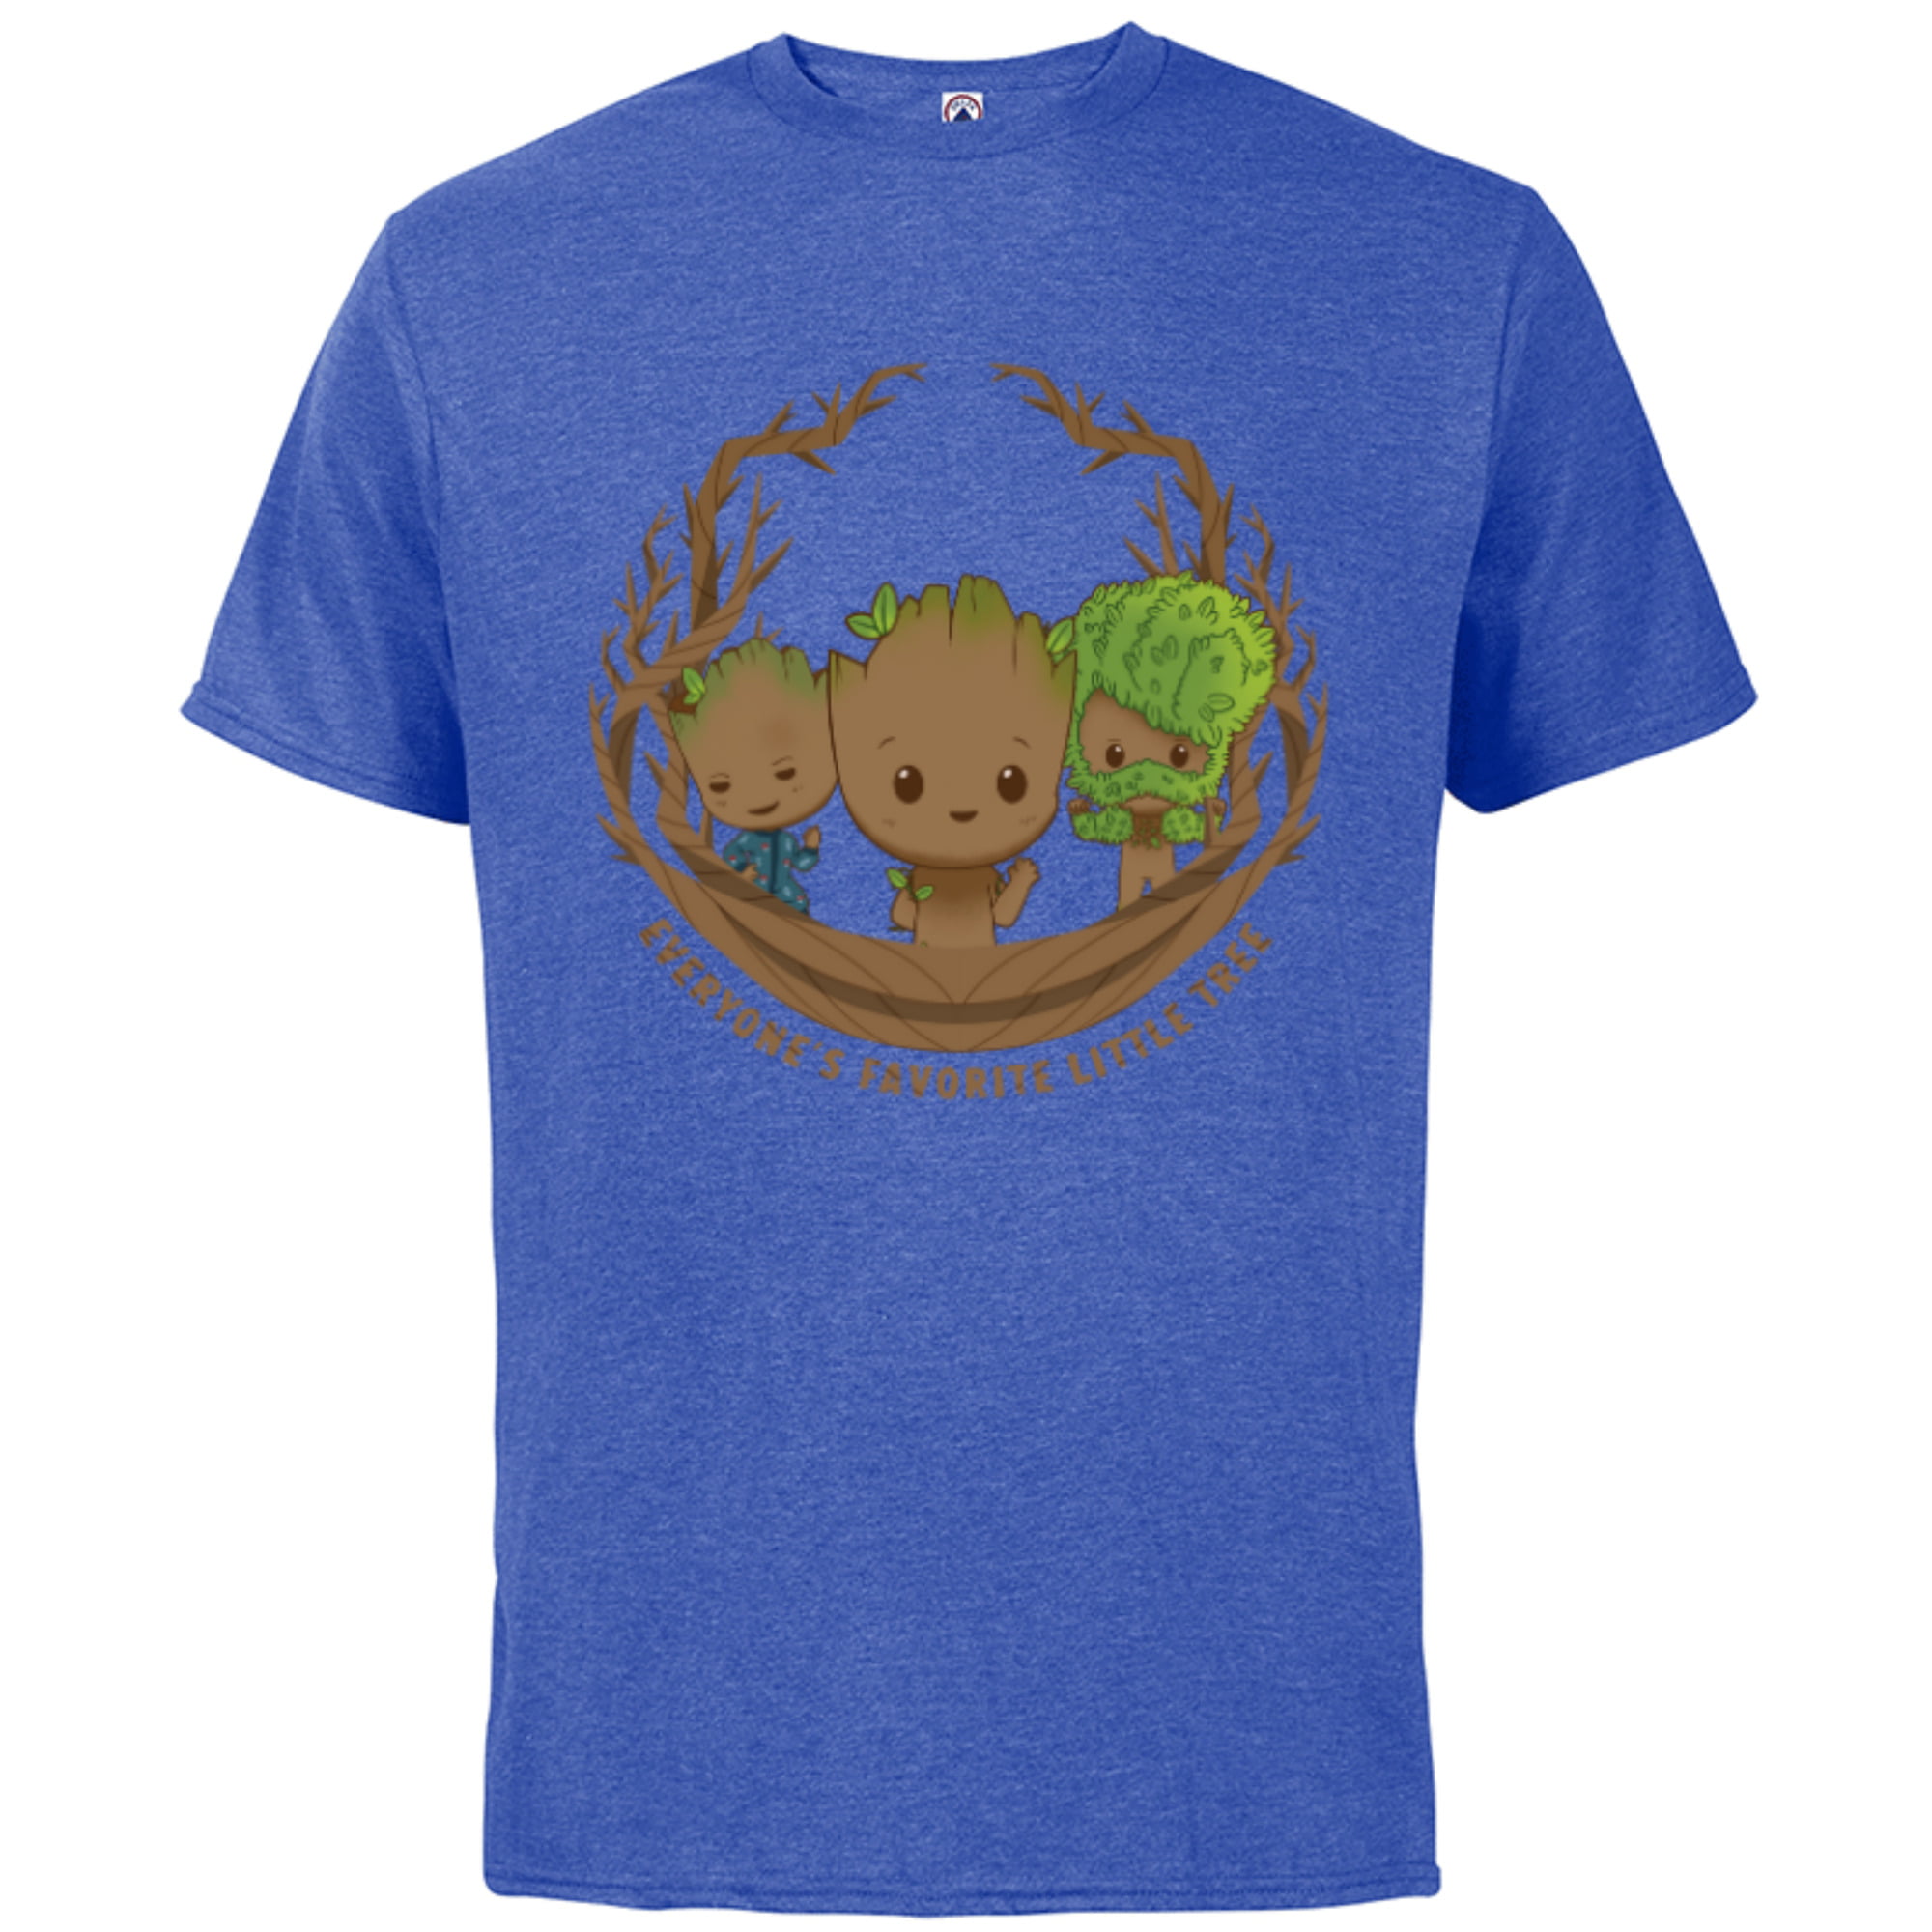 Marvel Studios’ I Am Groot Everyone’s Favorite Little Tree   Short Sleeve  Cotton T Shirt for Adults   Customized Royal Heather